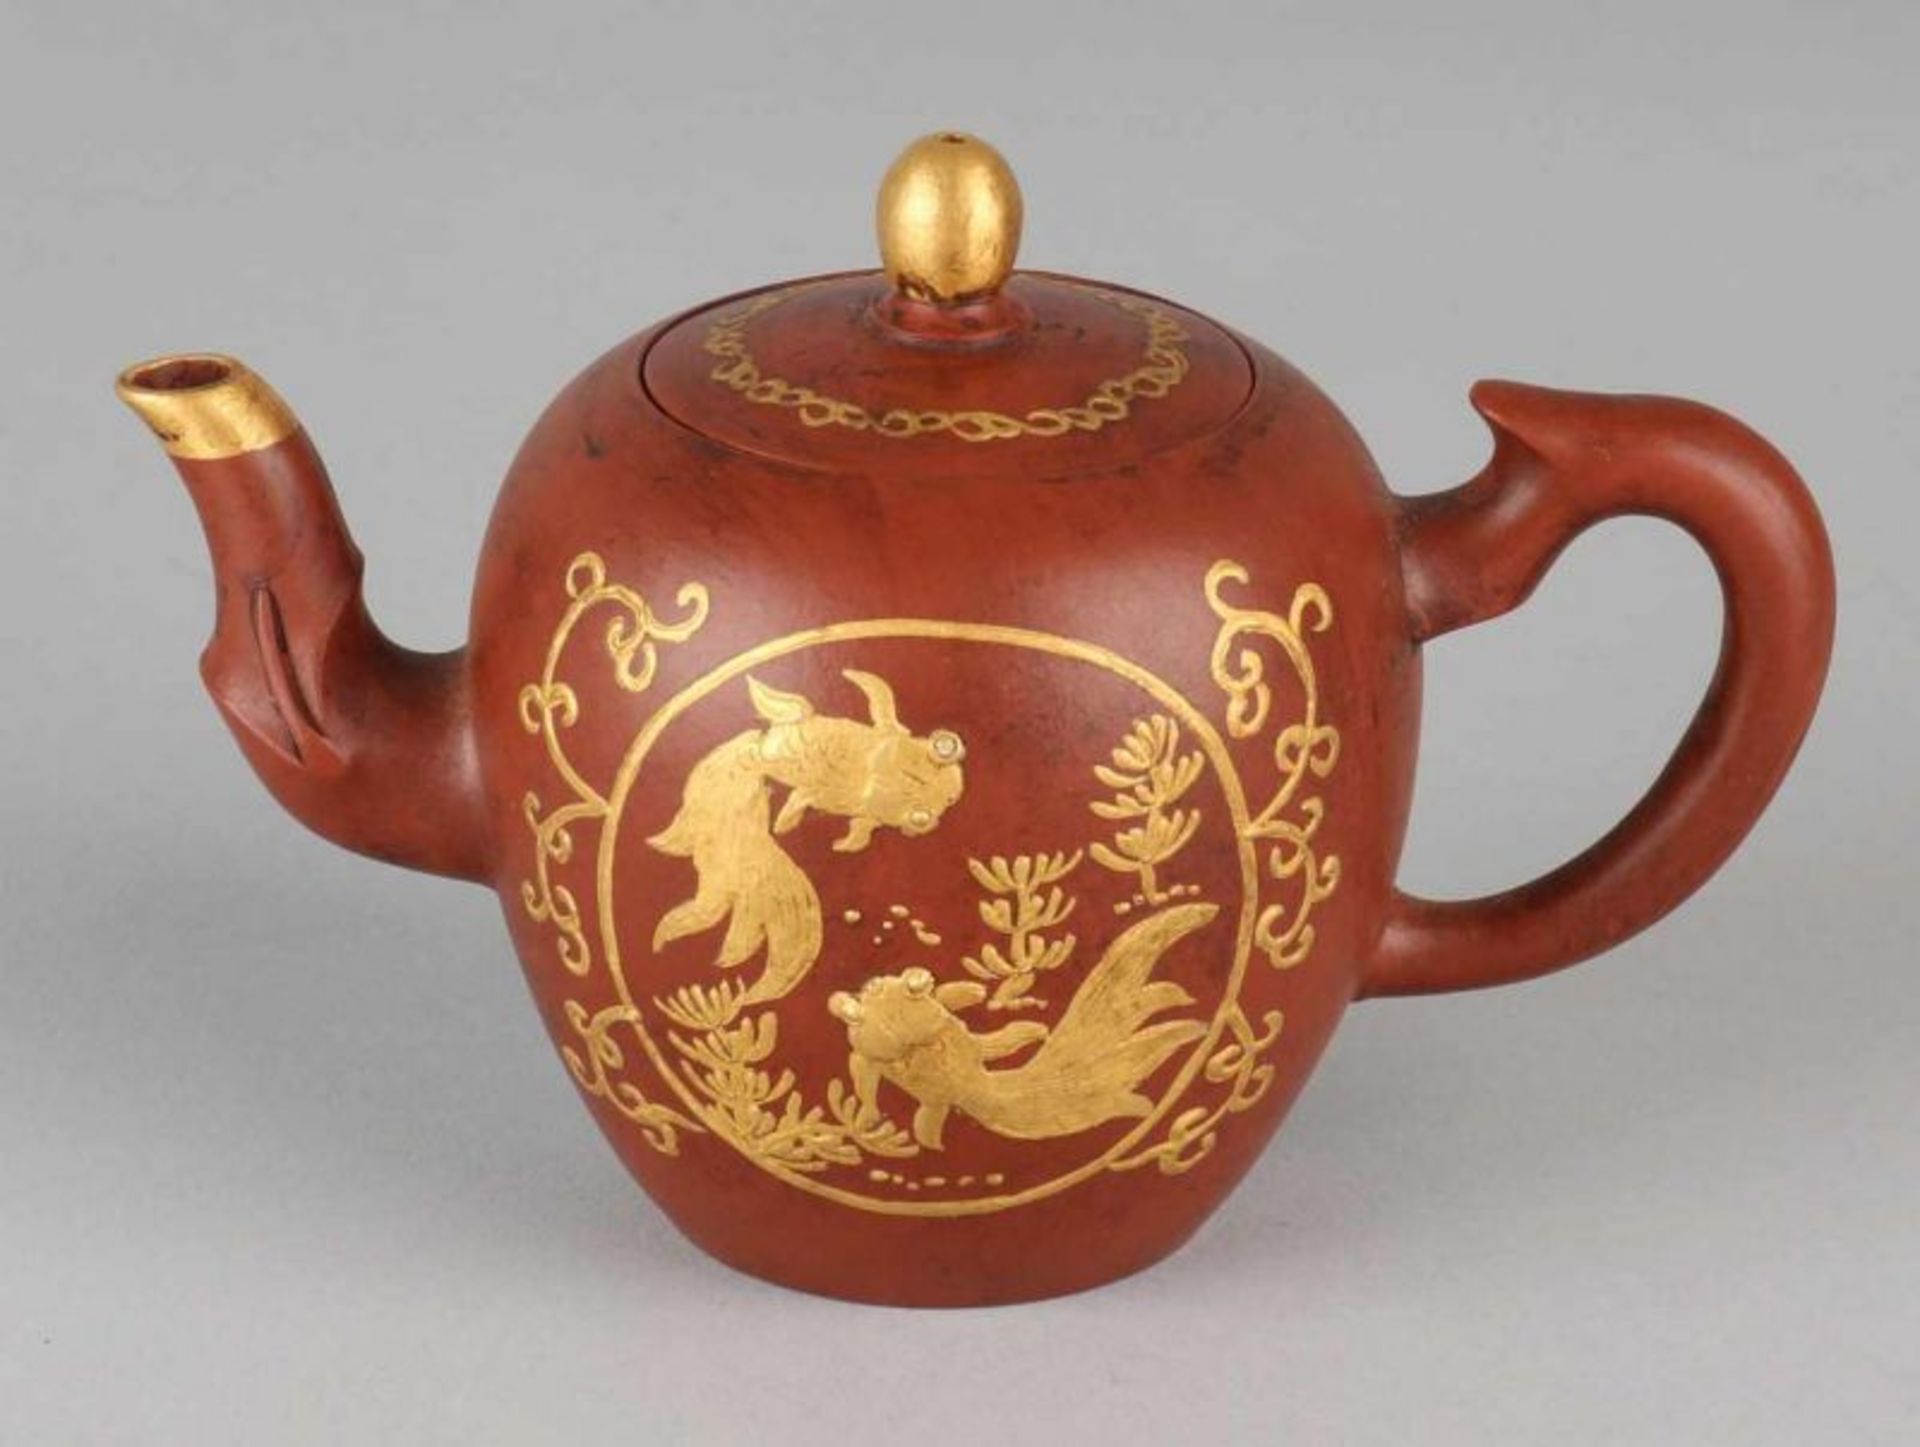 Old / antique Chinese Yixing teapot with golden veil fish decor. Bottom Brand. Size: 9 x 13 x 7